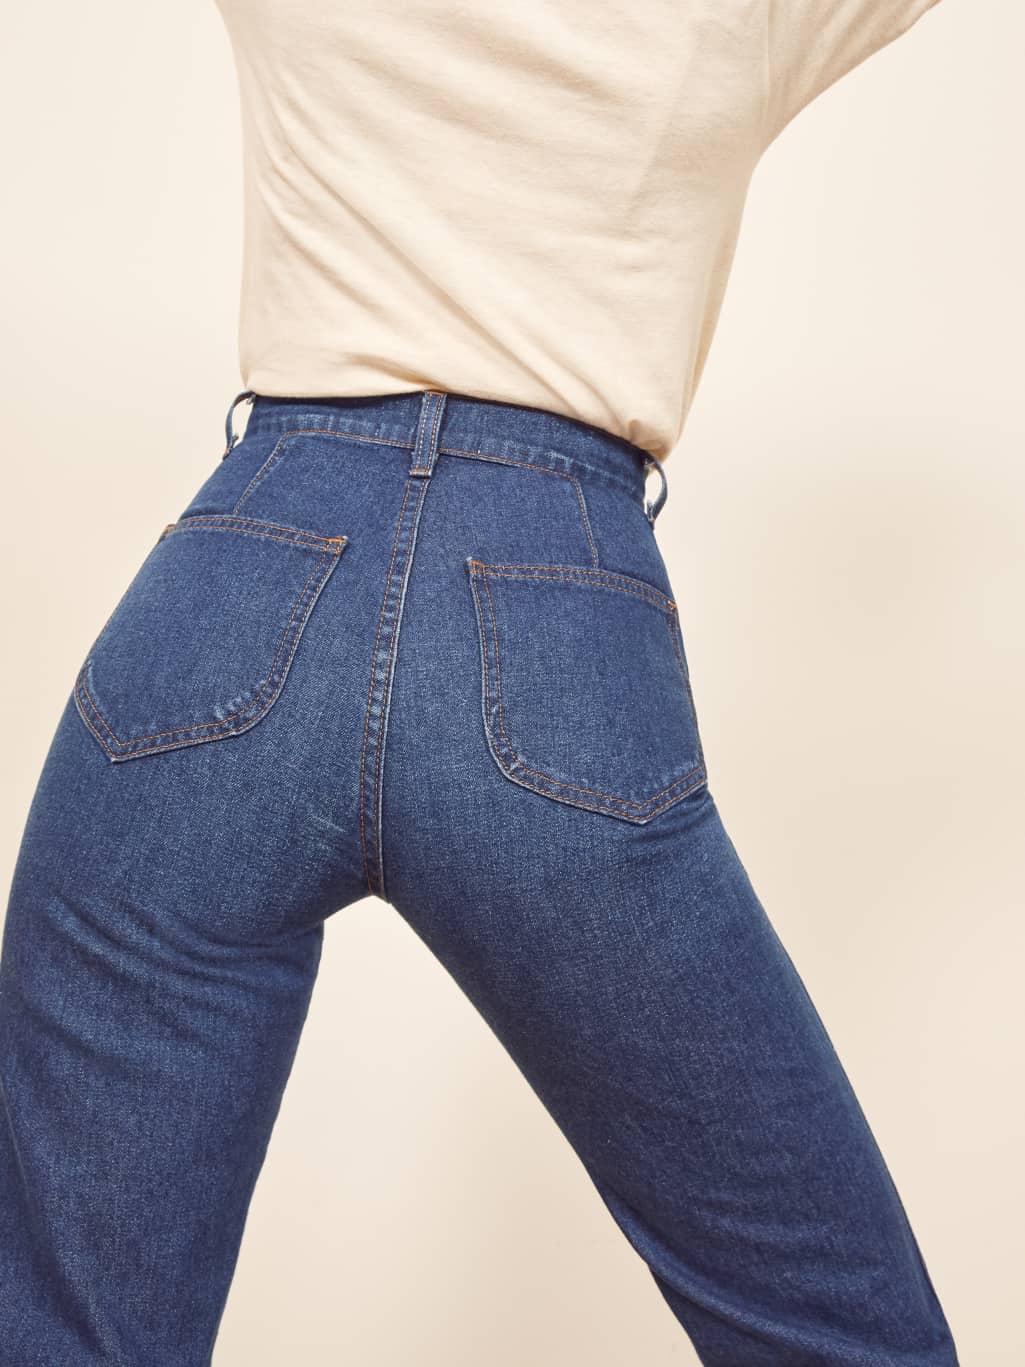 willow jean reformation